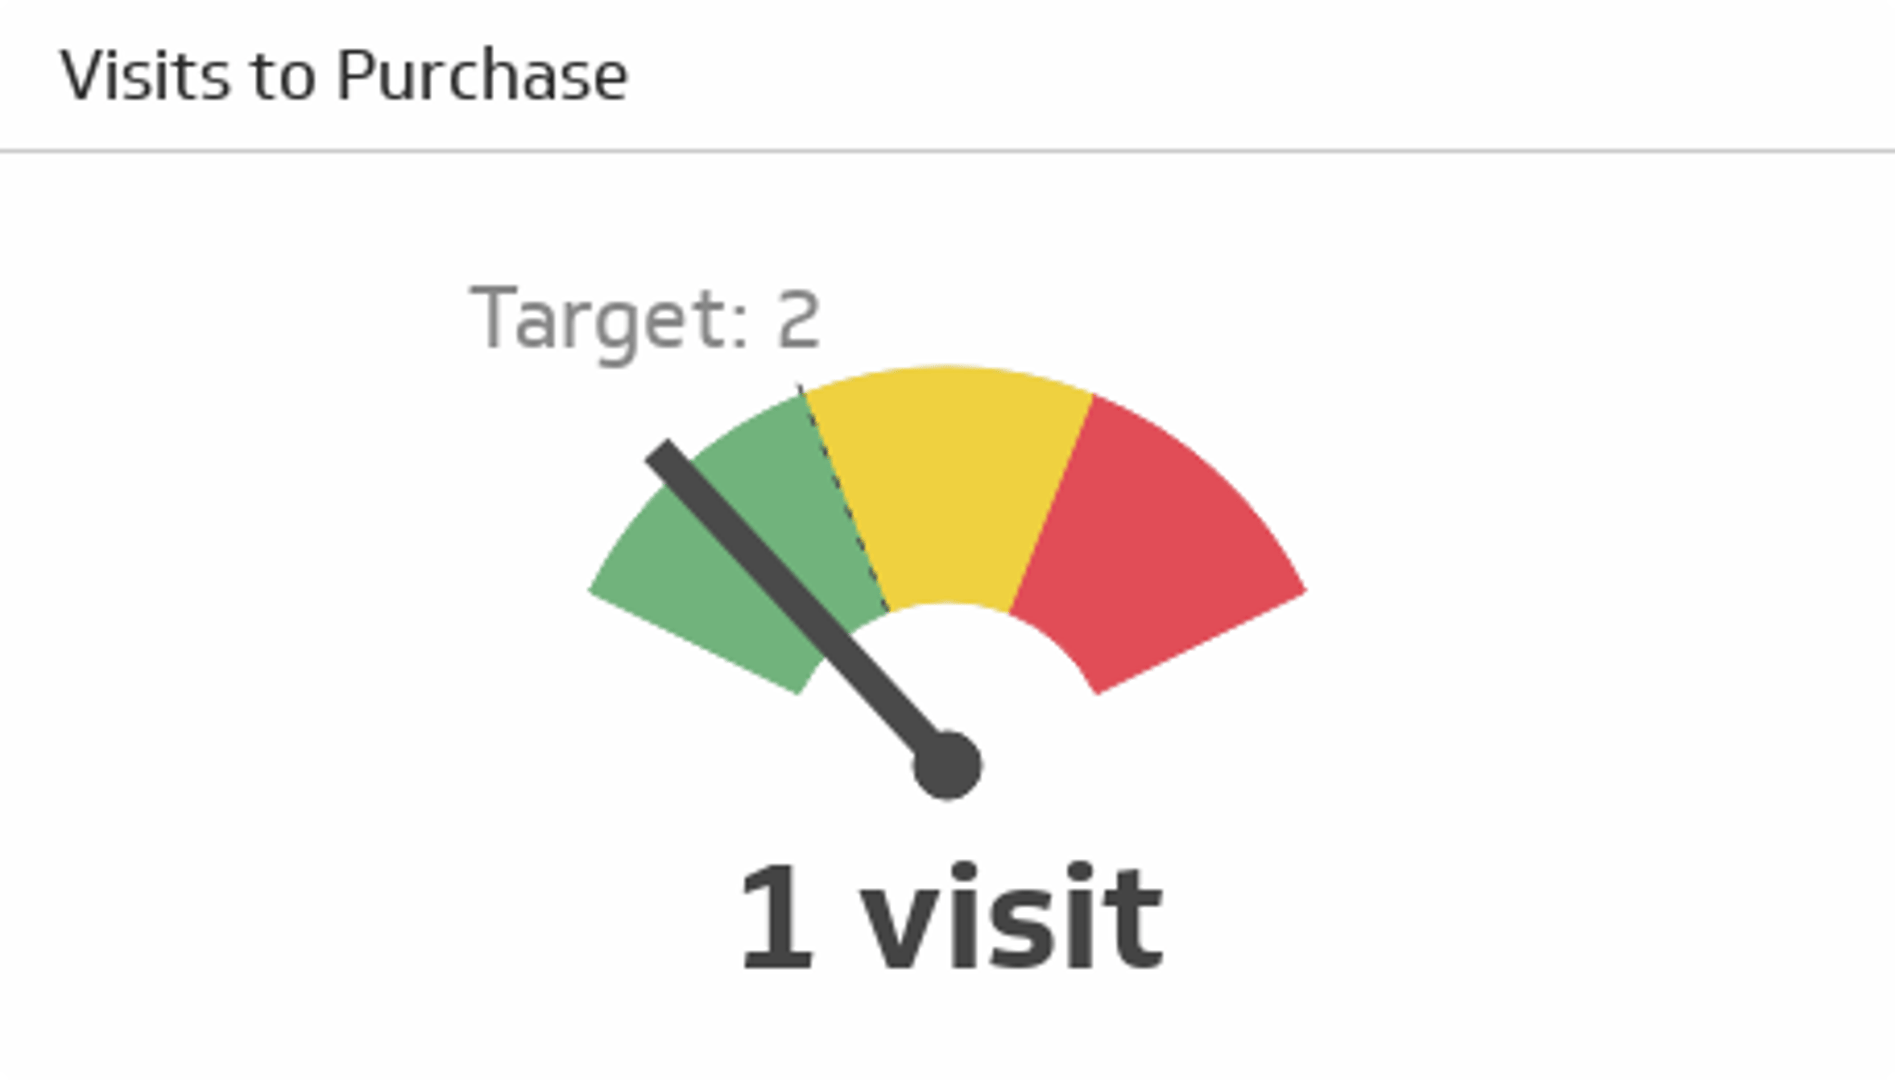 Related KPI Examples - Visits to Purchase Metric